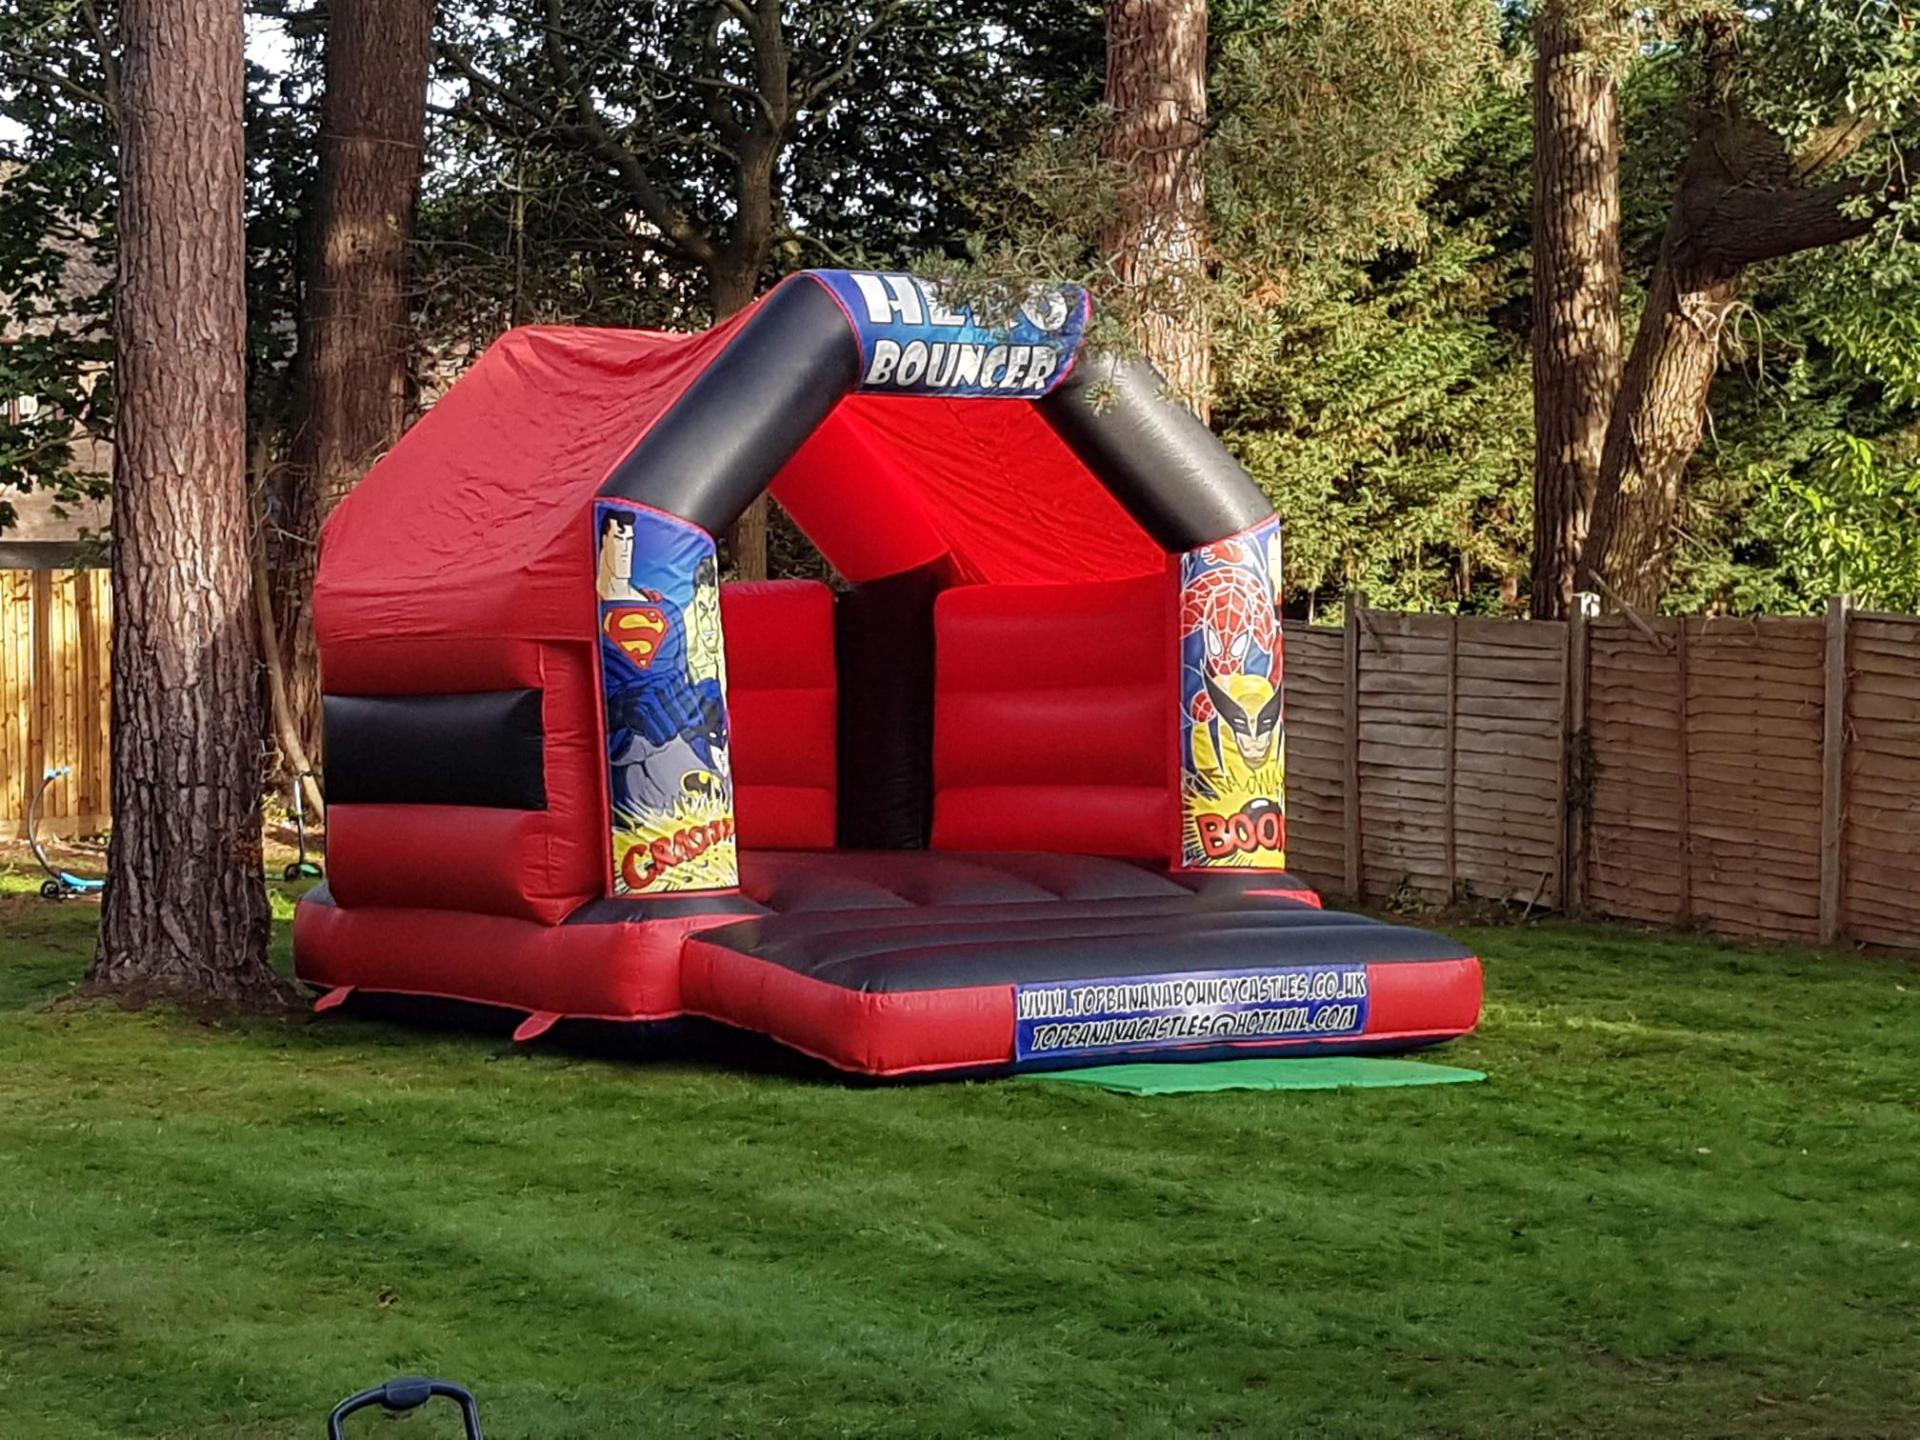 red and black super hero small bouncy castle in a garden